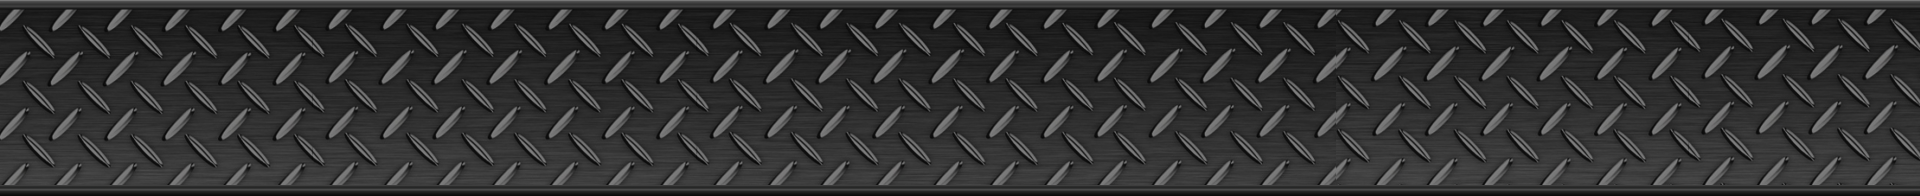 Tread Plate Background